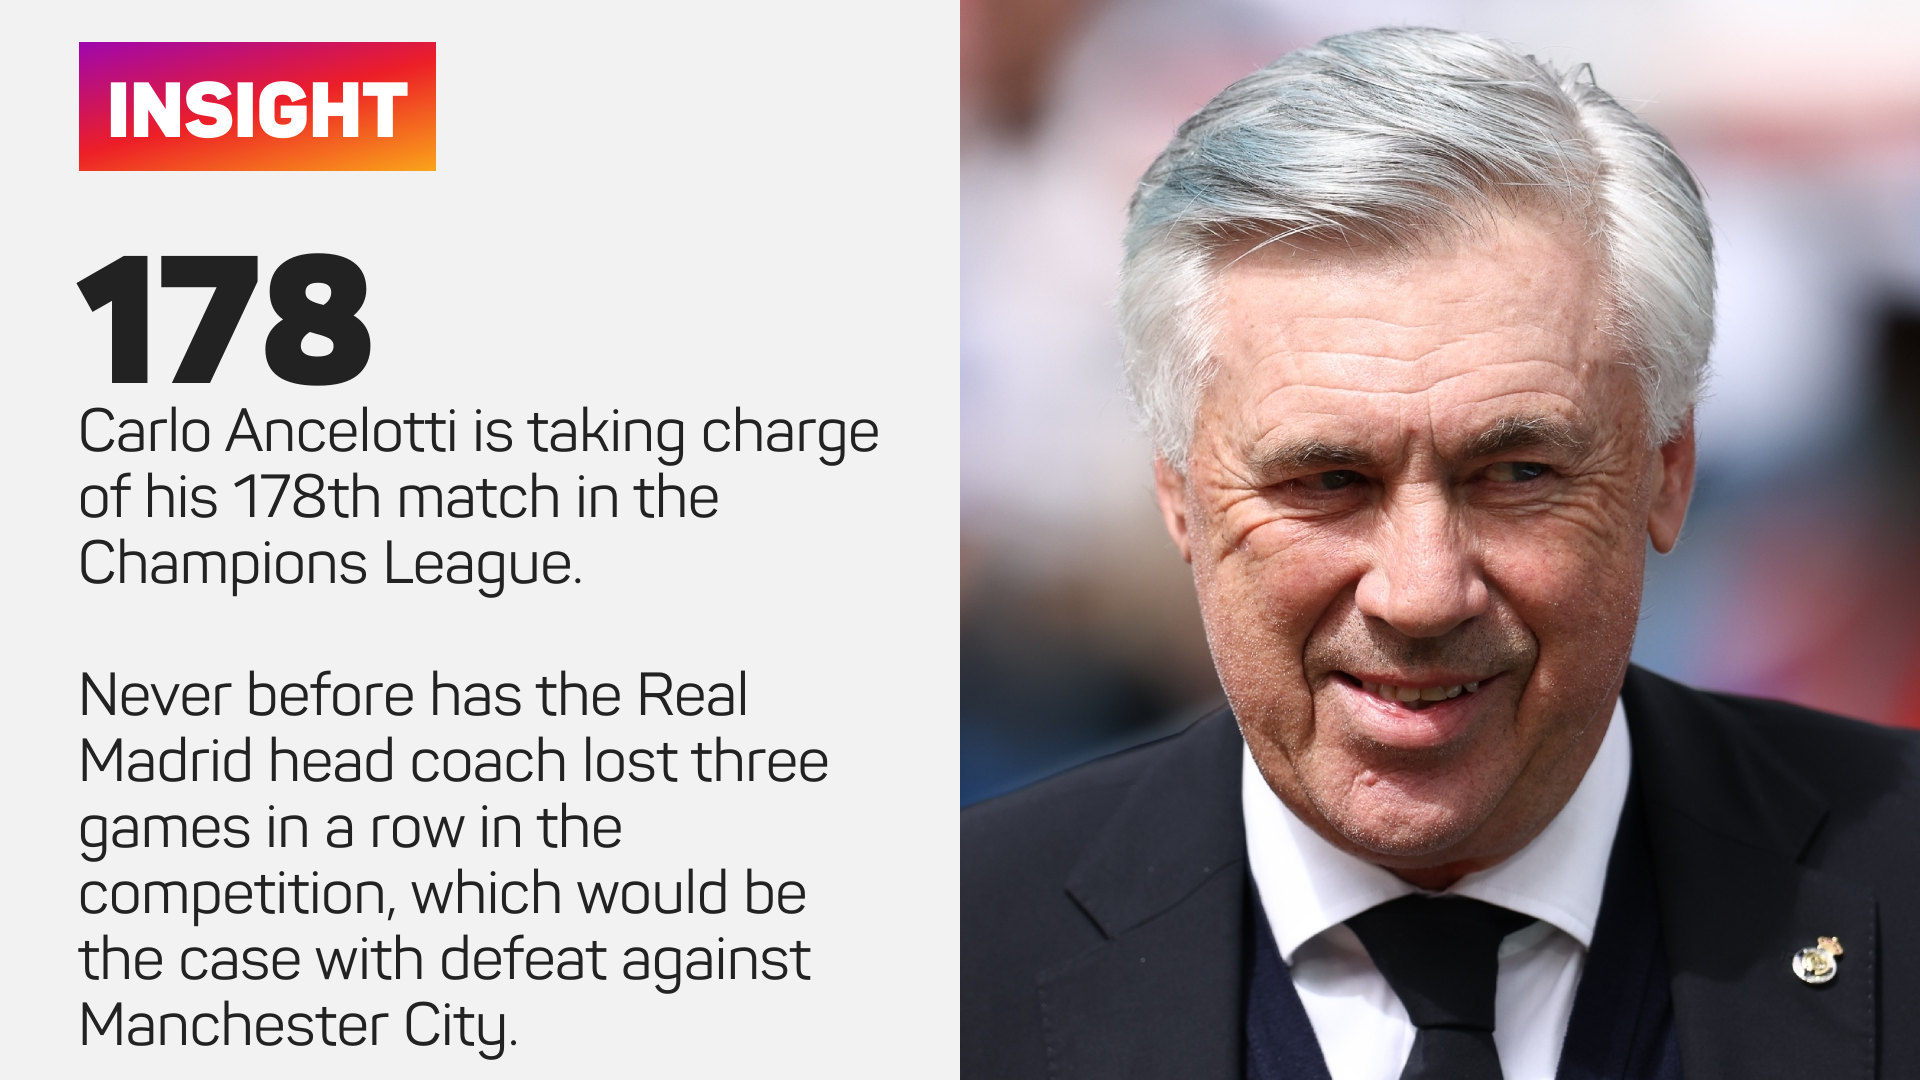 Carlo Ancelotti is taking charge of his 178th Champions League match